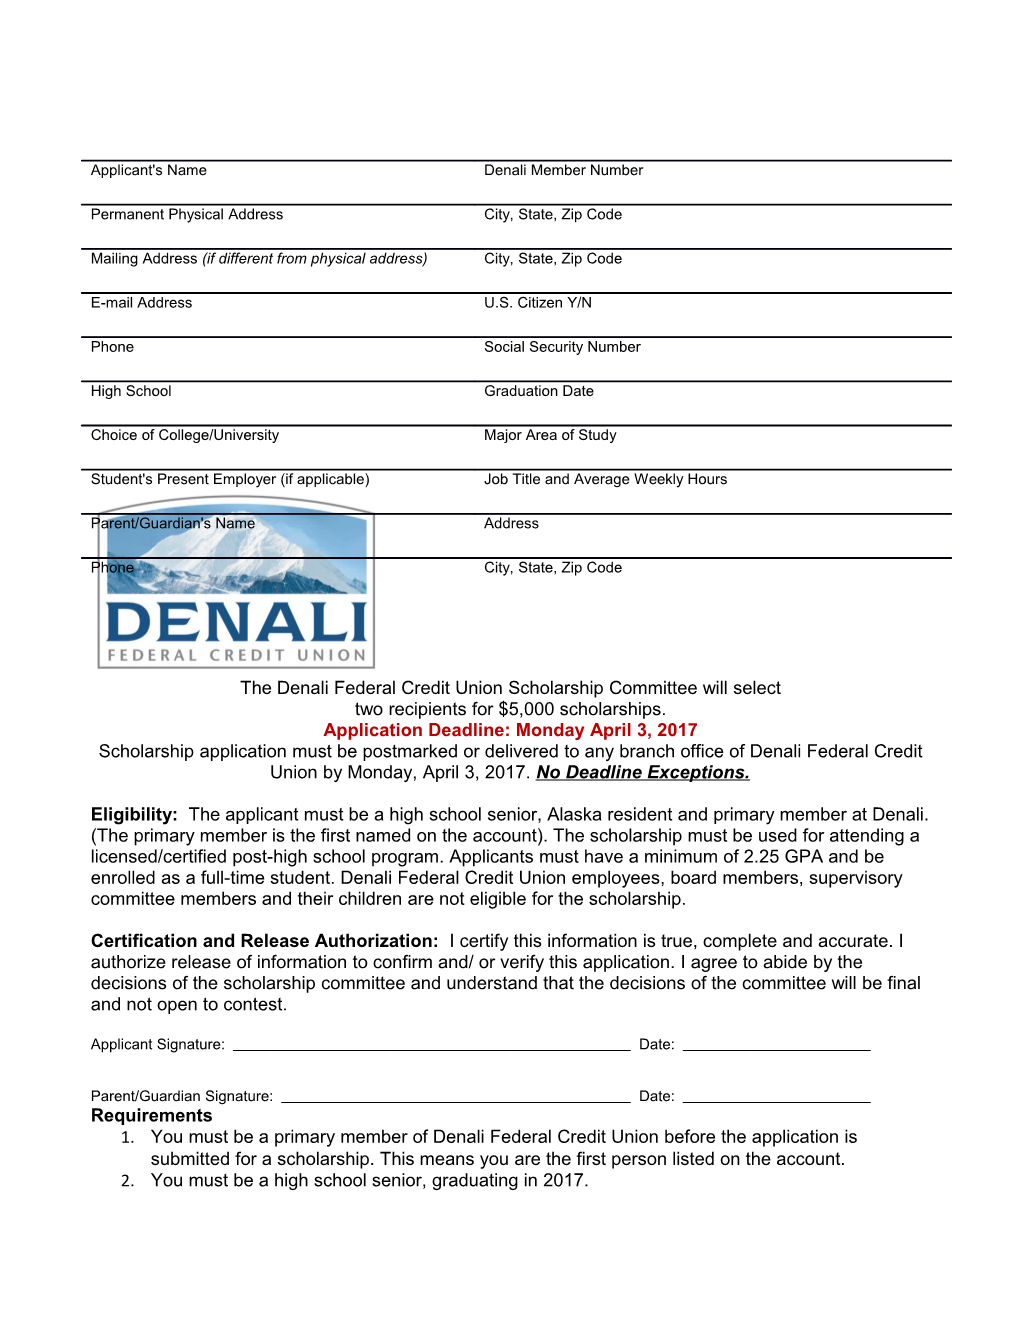 The Denali Federal Credit Union Scholarship Committee Will Select